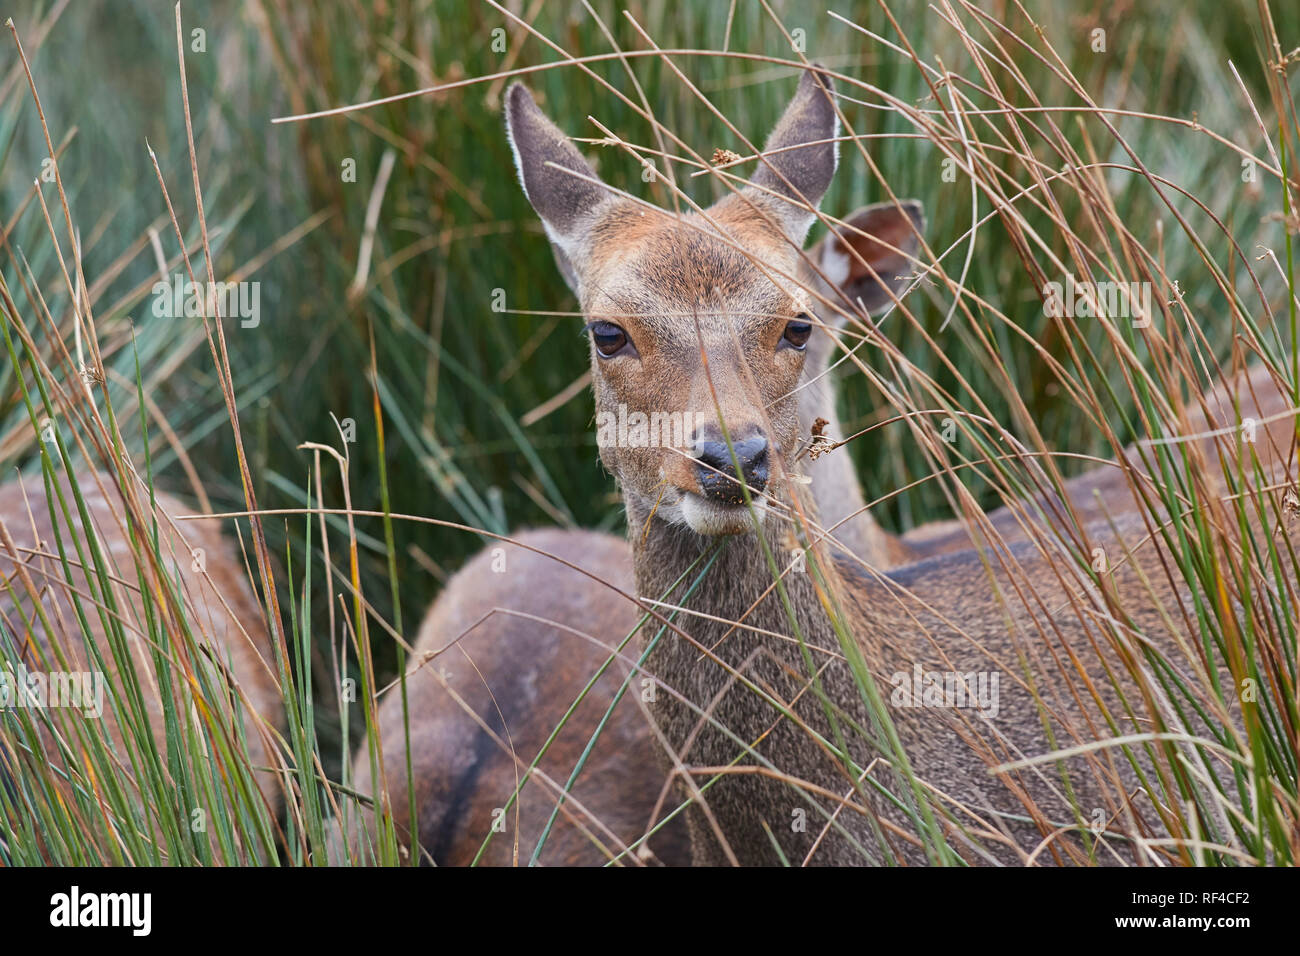 Sika deer (Cervus nippon) in the countryside of Devon, southwest England. The Sika is native to Japan, but can now be found in the UK. Stock Photo